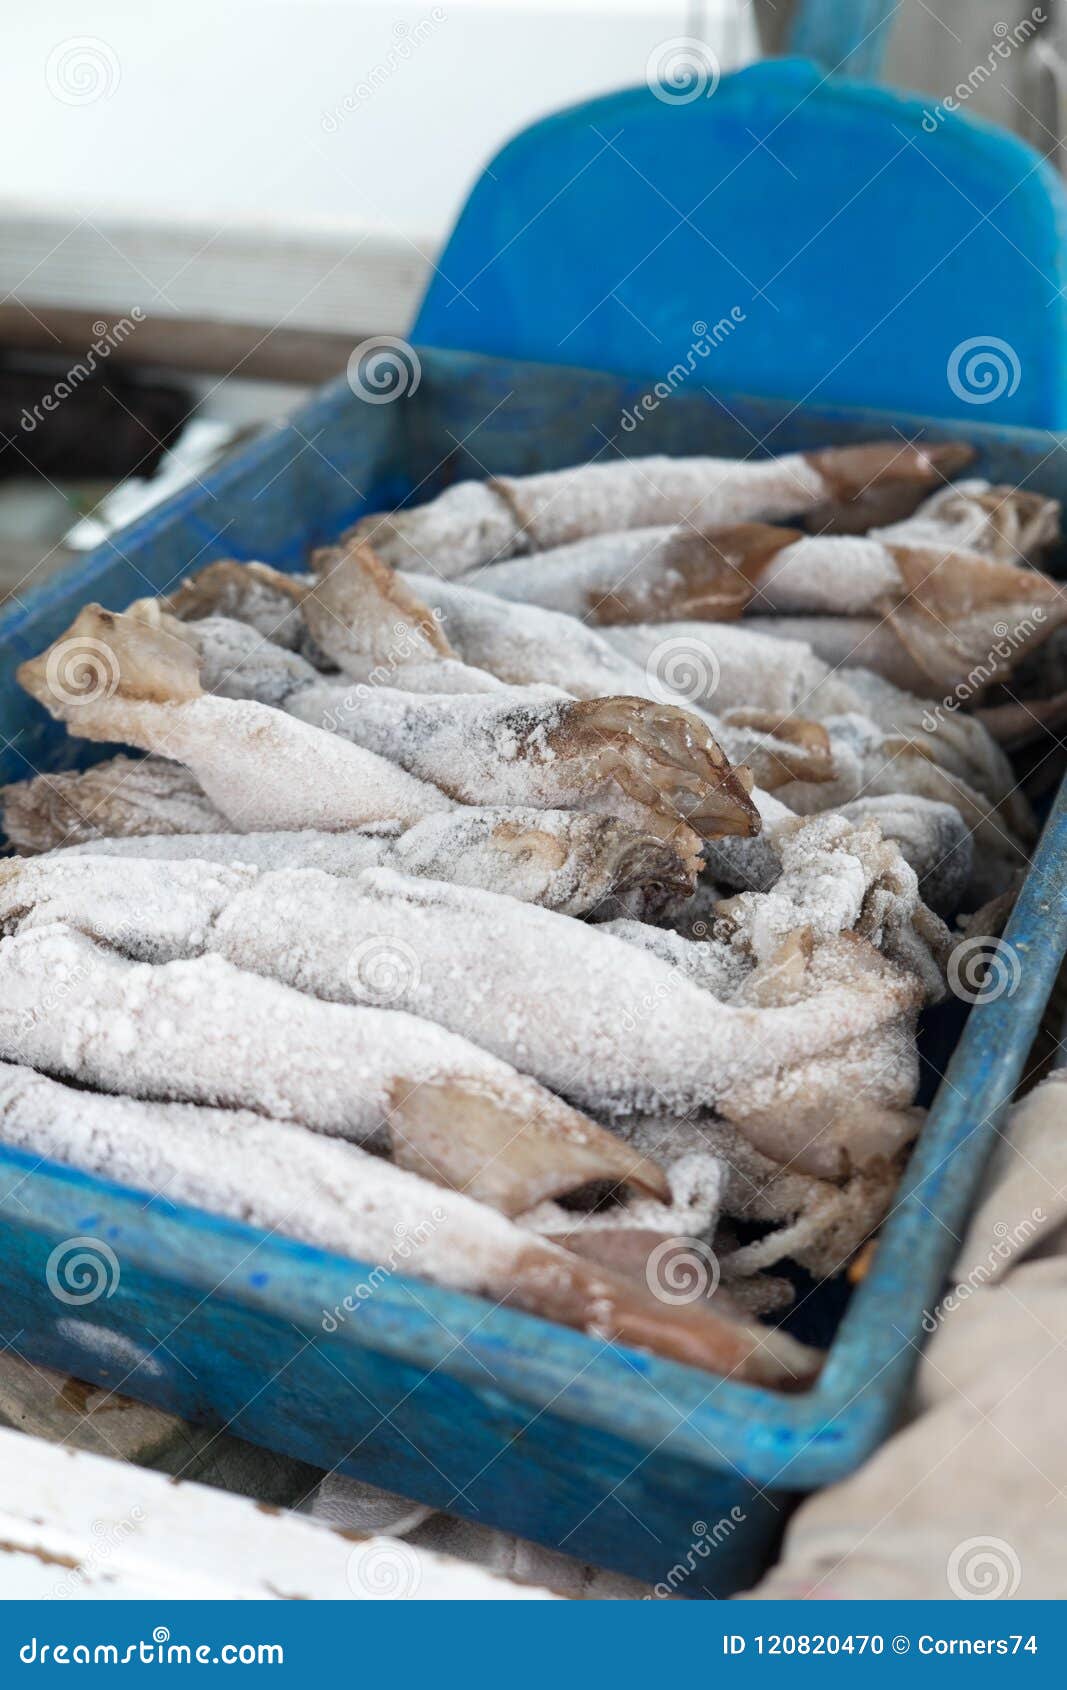 Frozen Squid for Fishing Bait Thawing in a Tray with Shallow Depth of Field  Stock Photo - Image of vessel, selective: 120820470